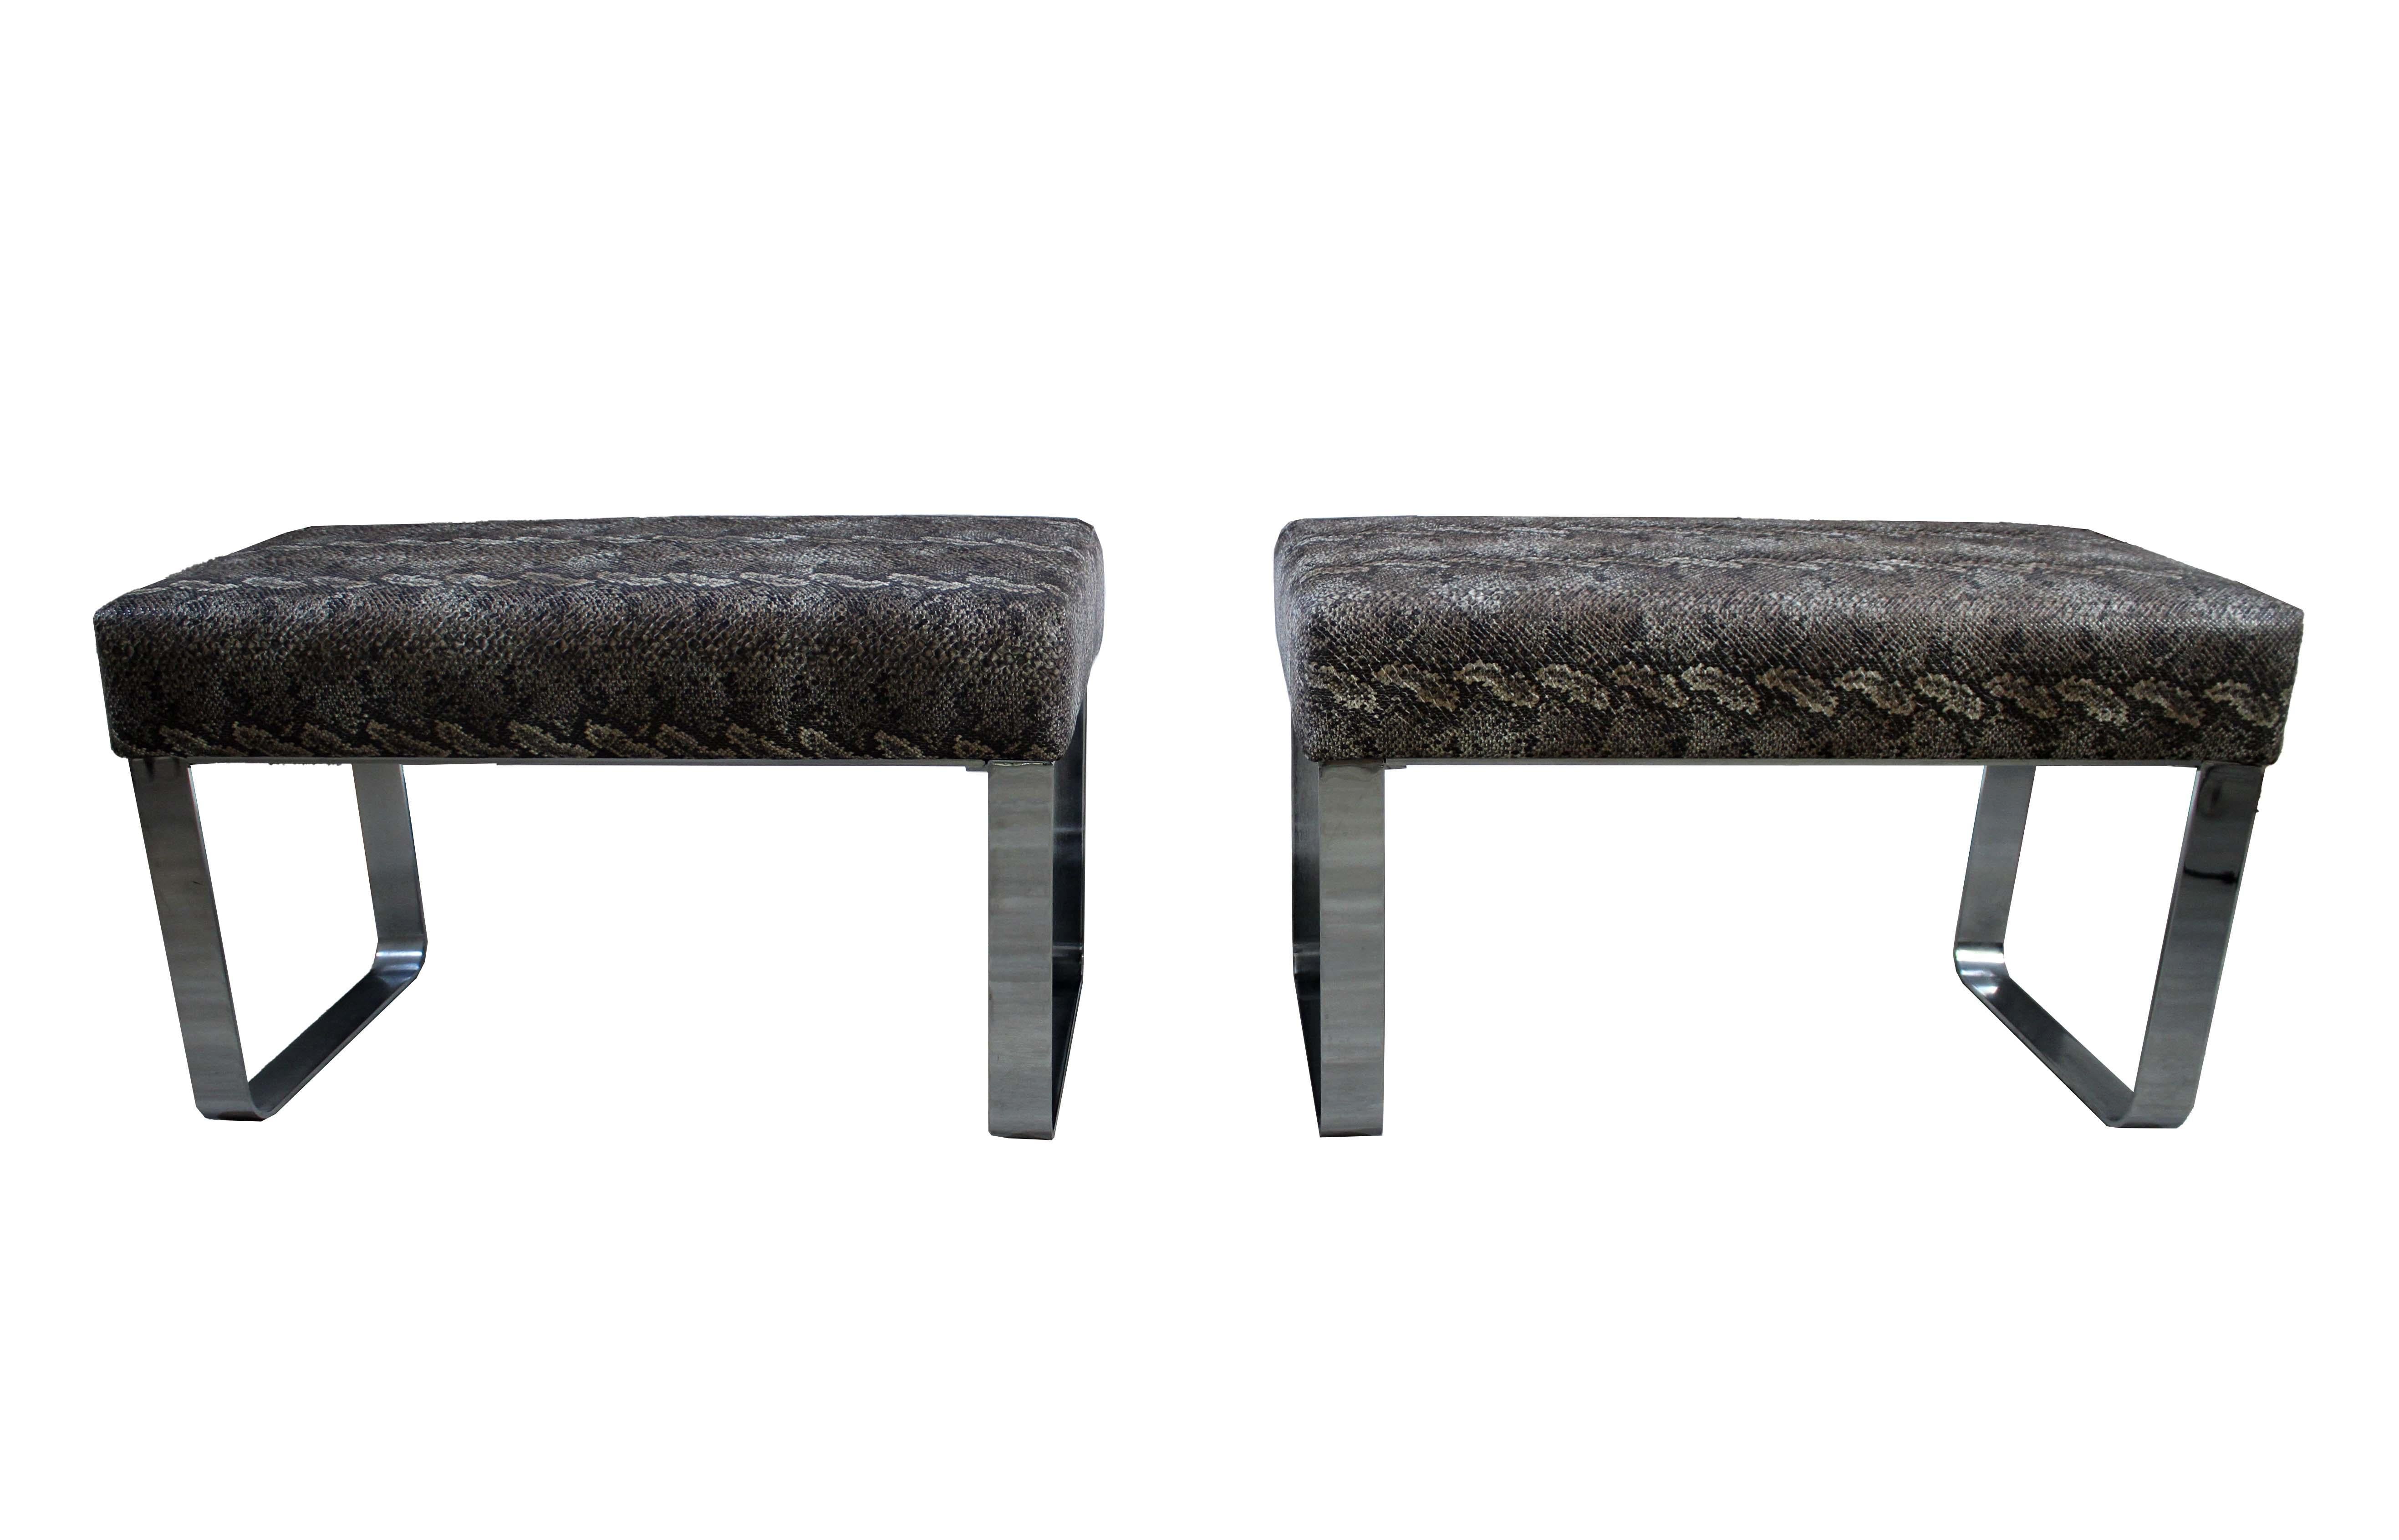 This stunning faux python covered console table with two ottomans is sure to be a conversation piece in any room. The table is made of a durable construction with a faux python patterned fabric covering. The ottomans are made of a matching faux